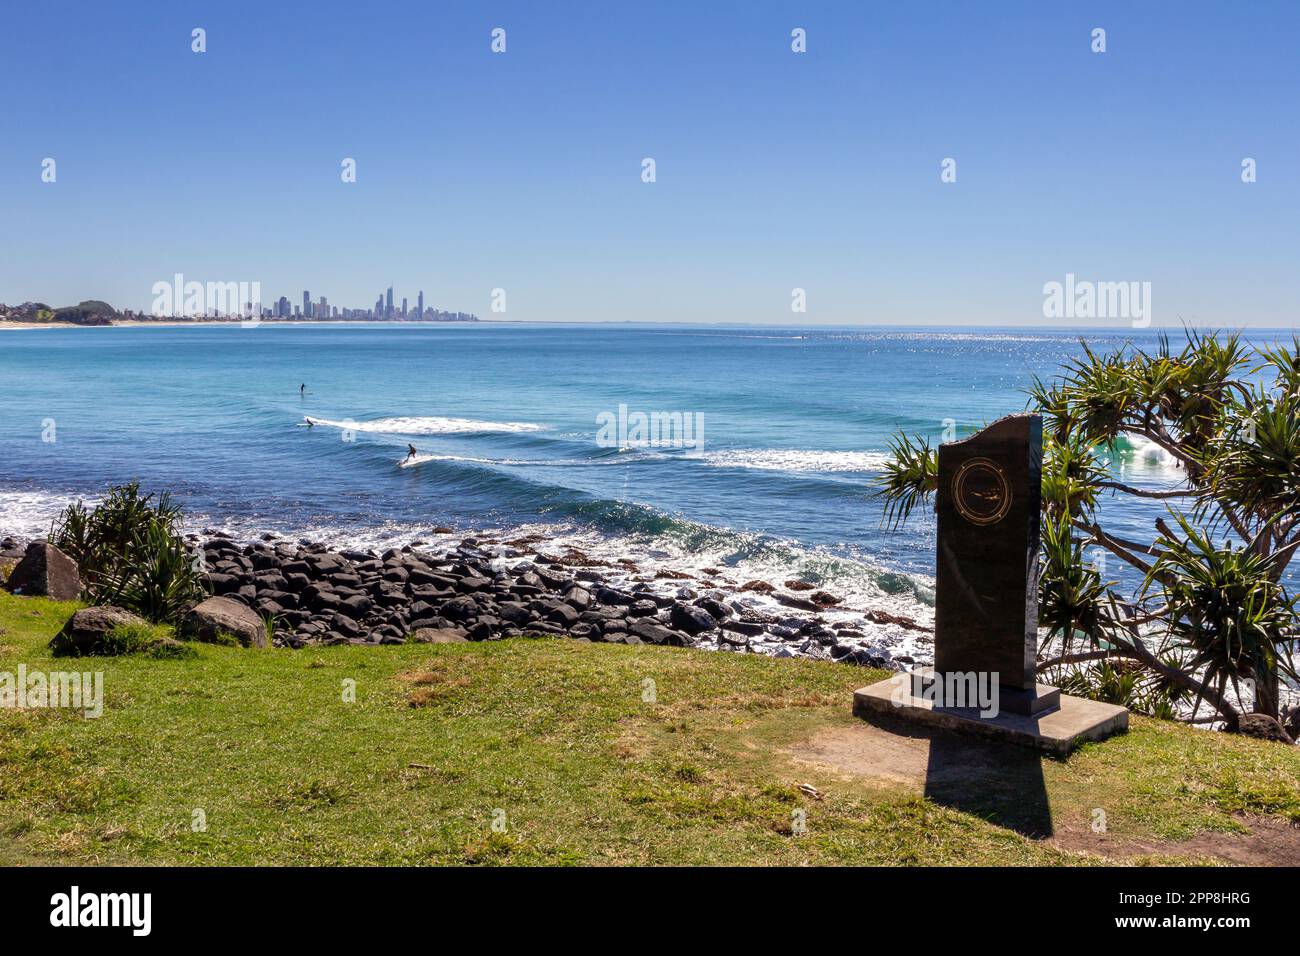 Burleigh Beach  with Surfer's Paradise in the background Stock Photo